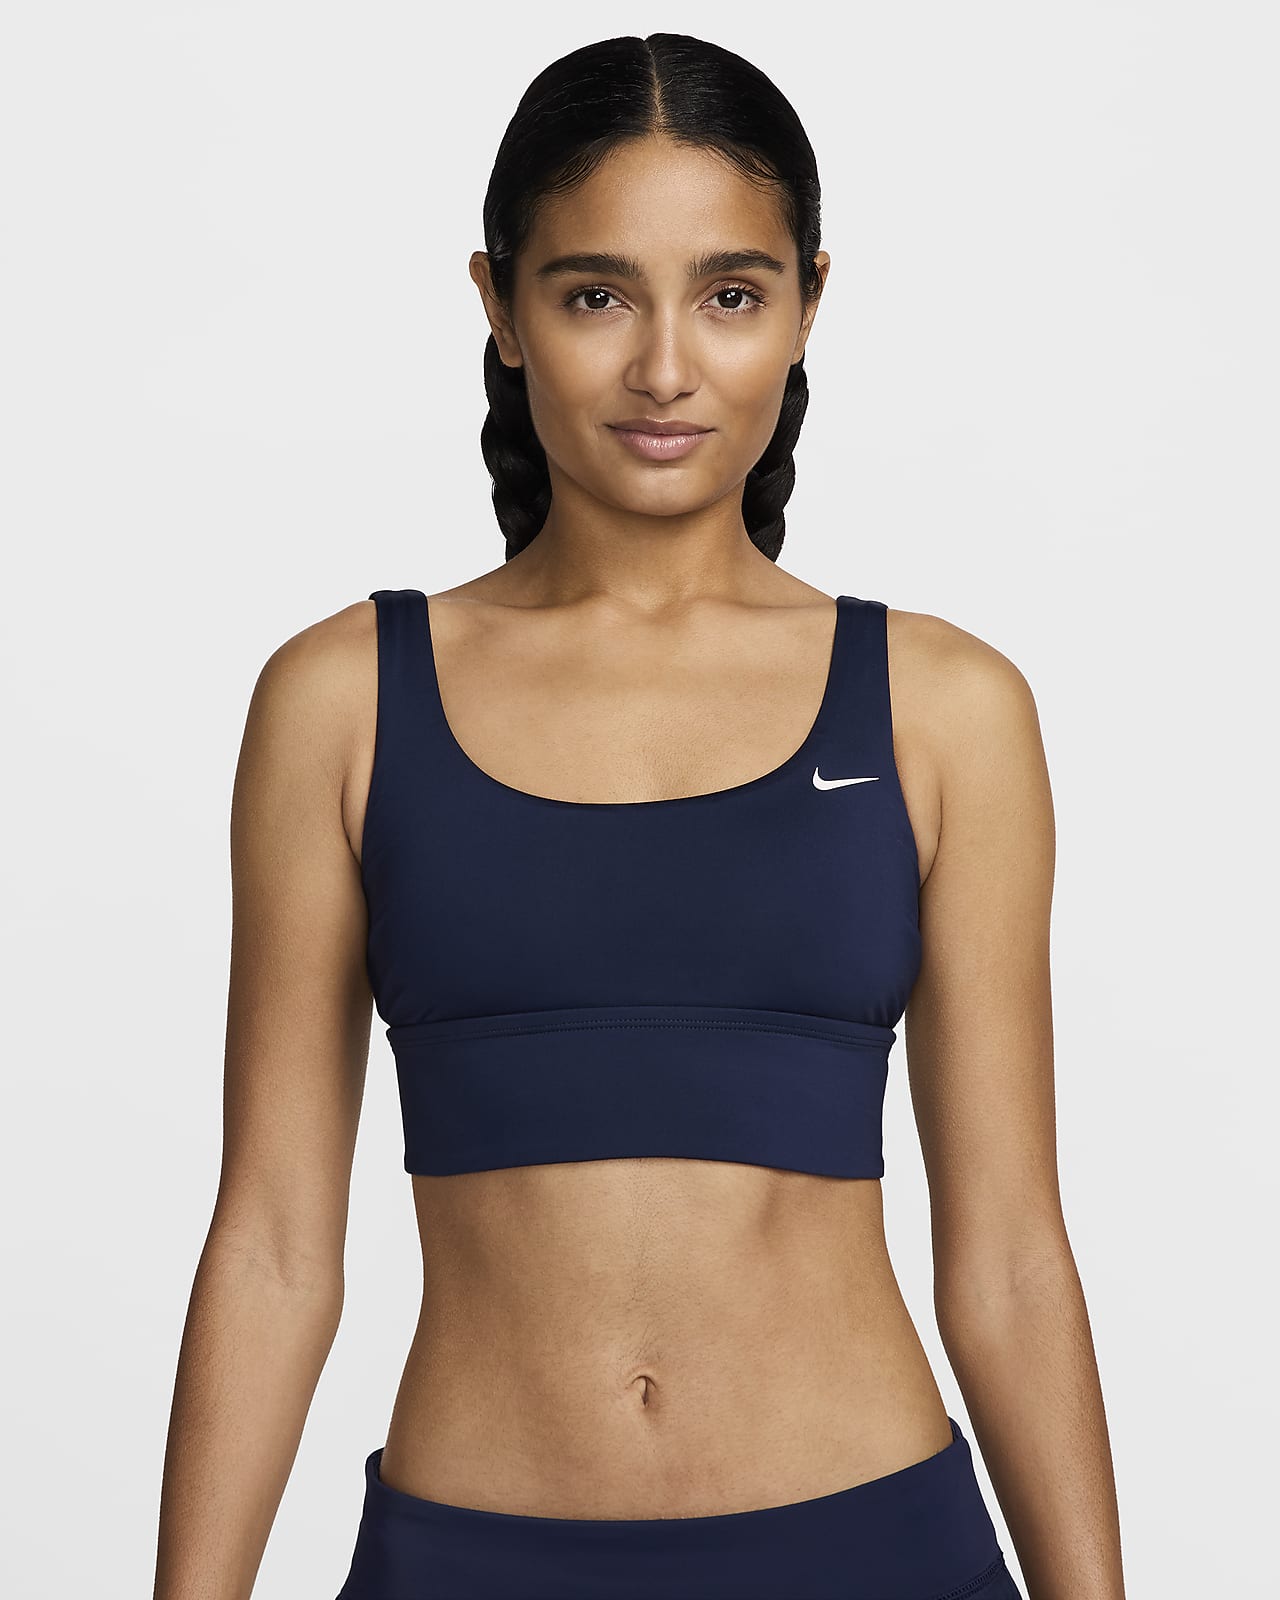 South Beach Maternity polyester nursing mid support sports bra in blue